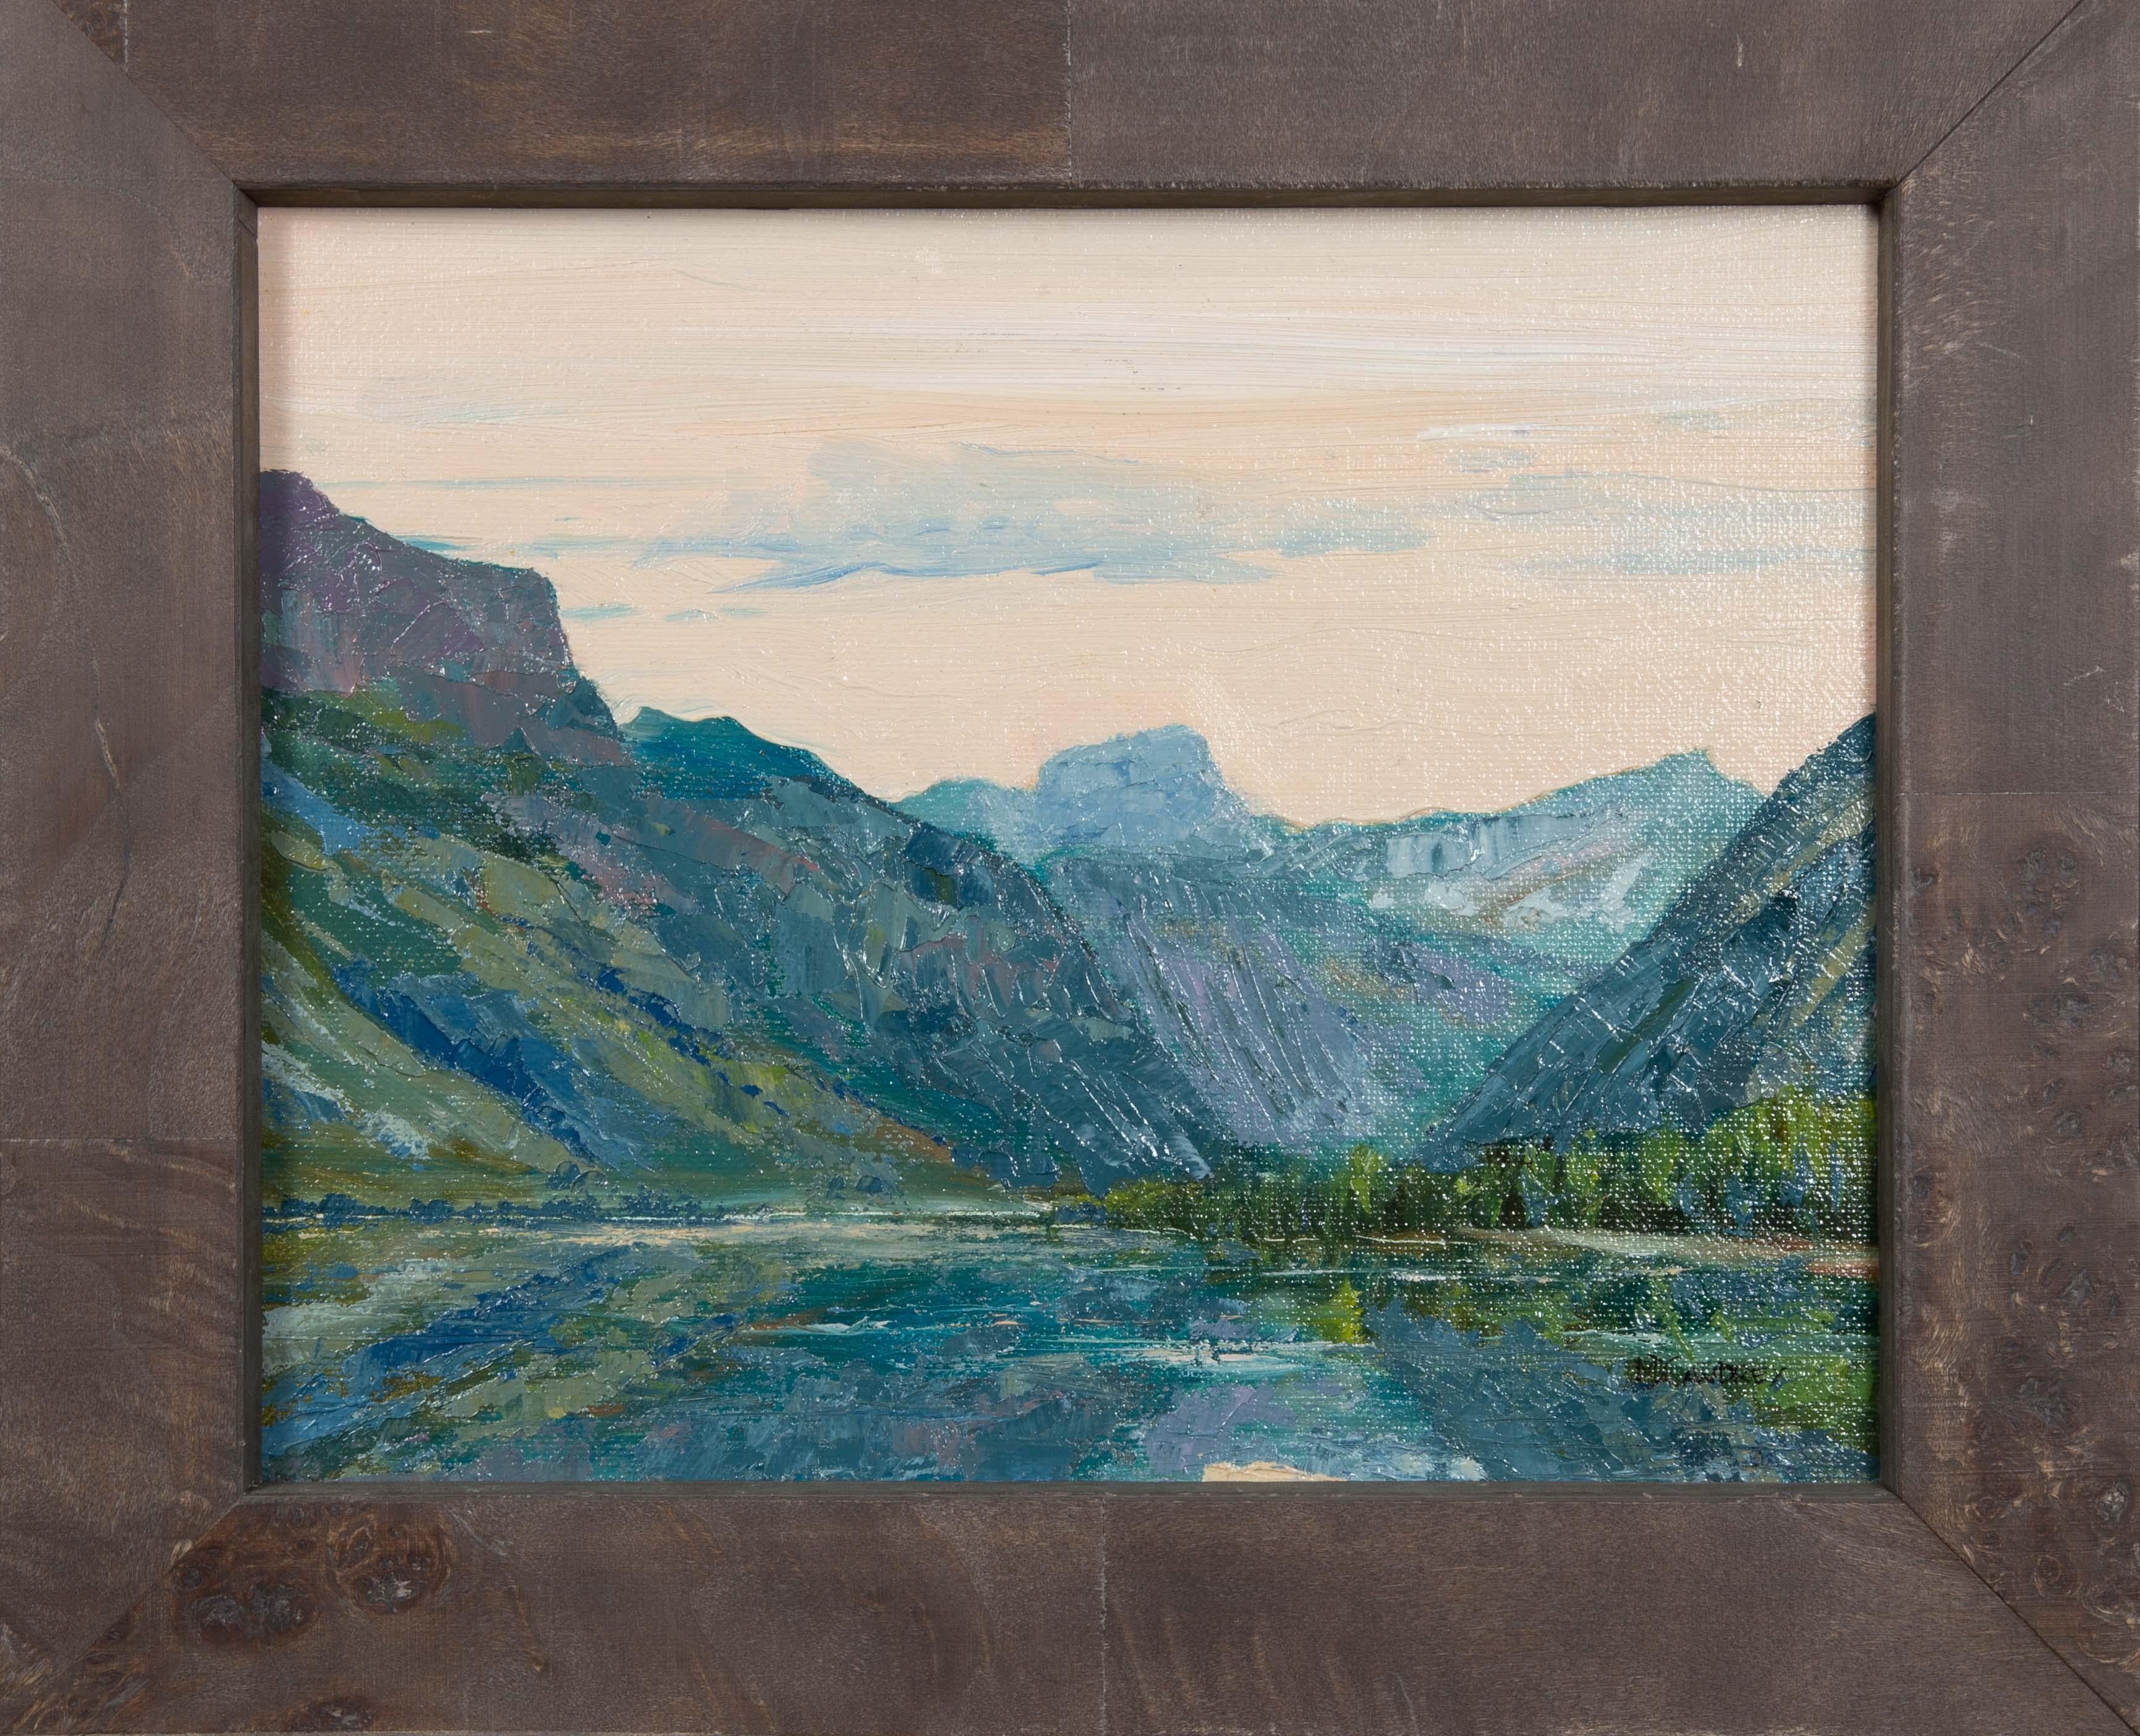 Dedo Carmiencke - Travelers on a Mountain Pass For Sale at 1stDibs ...